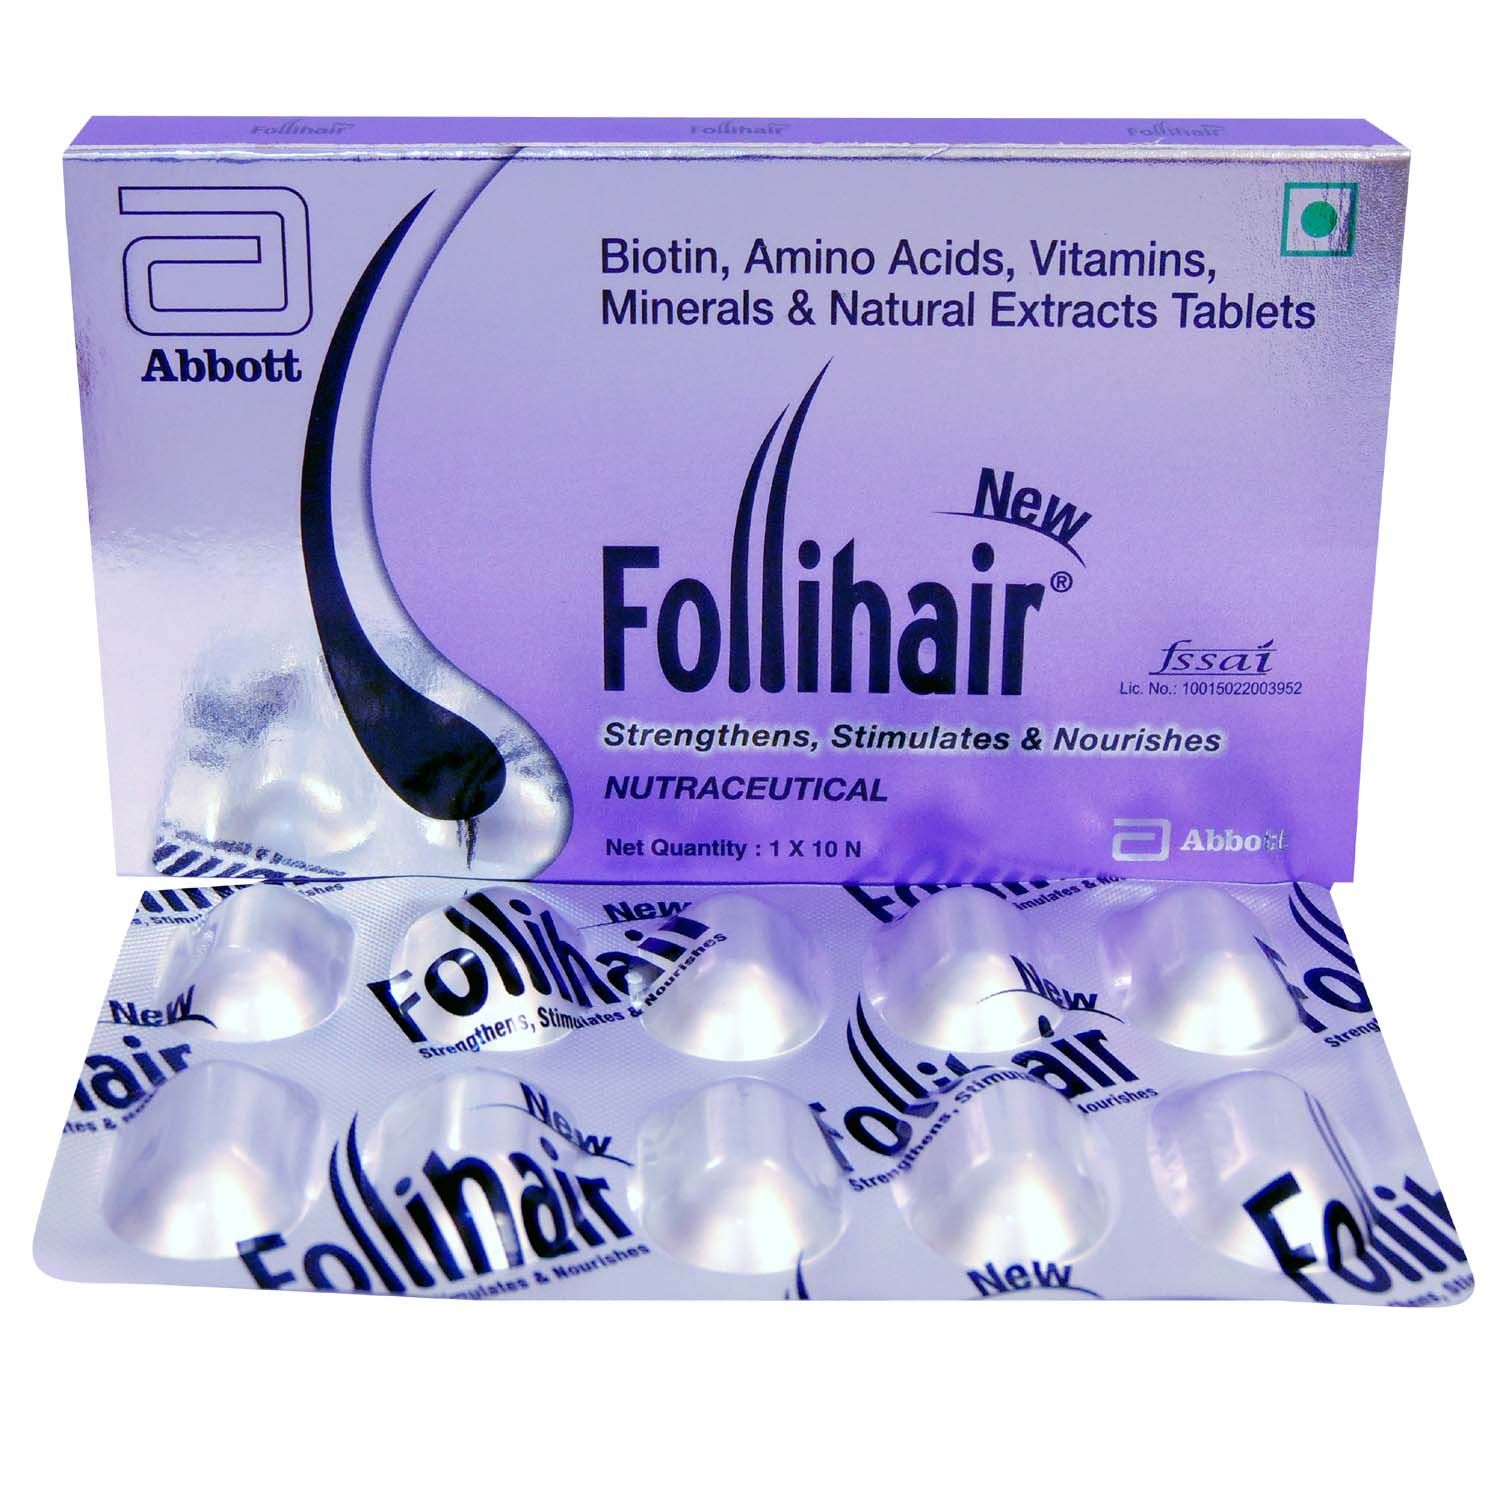 New Follihair Tablet 10's, Pack of 10 S